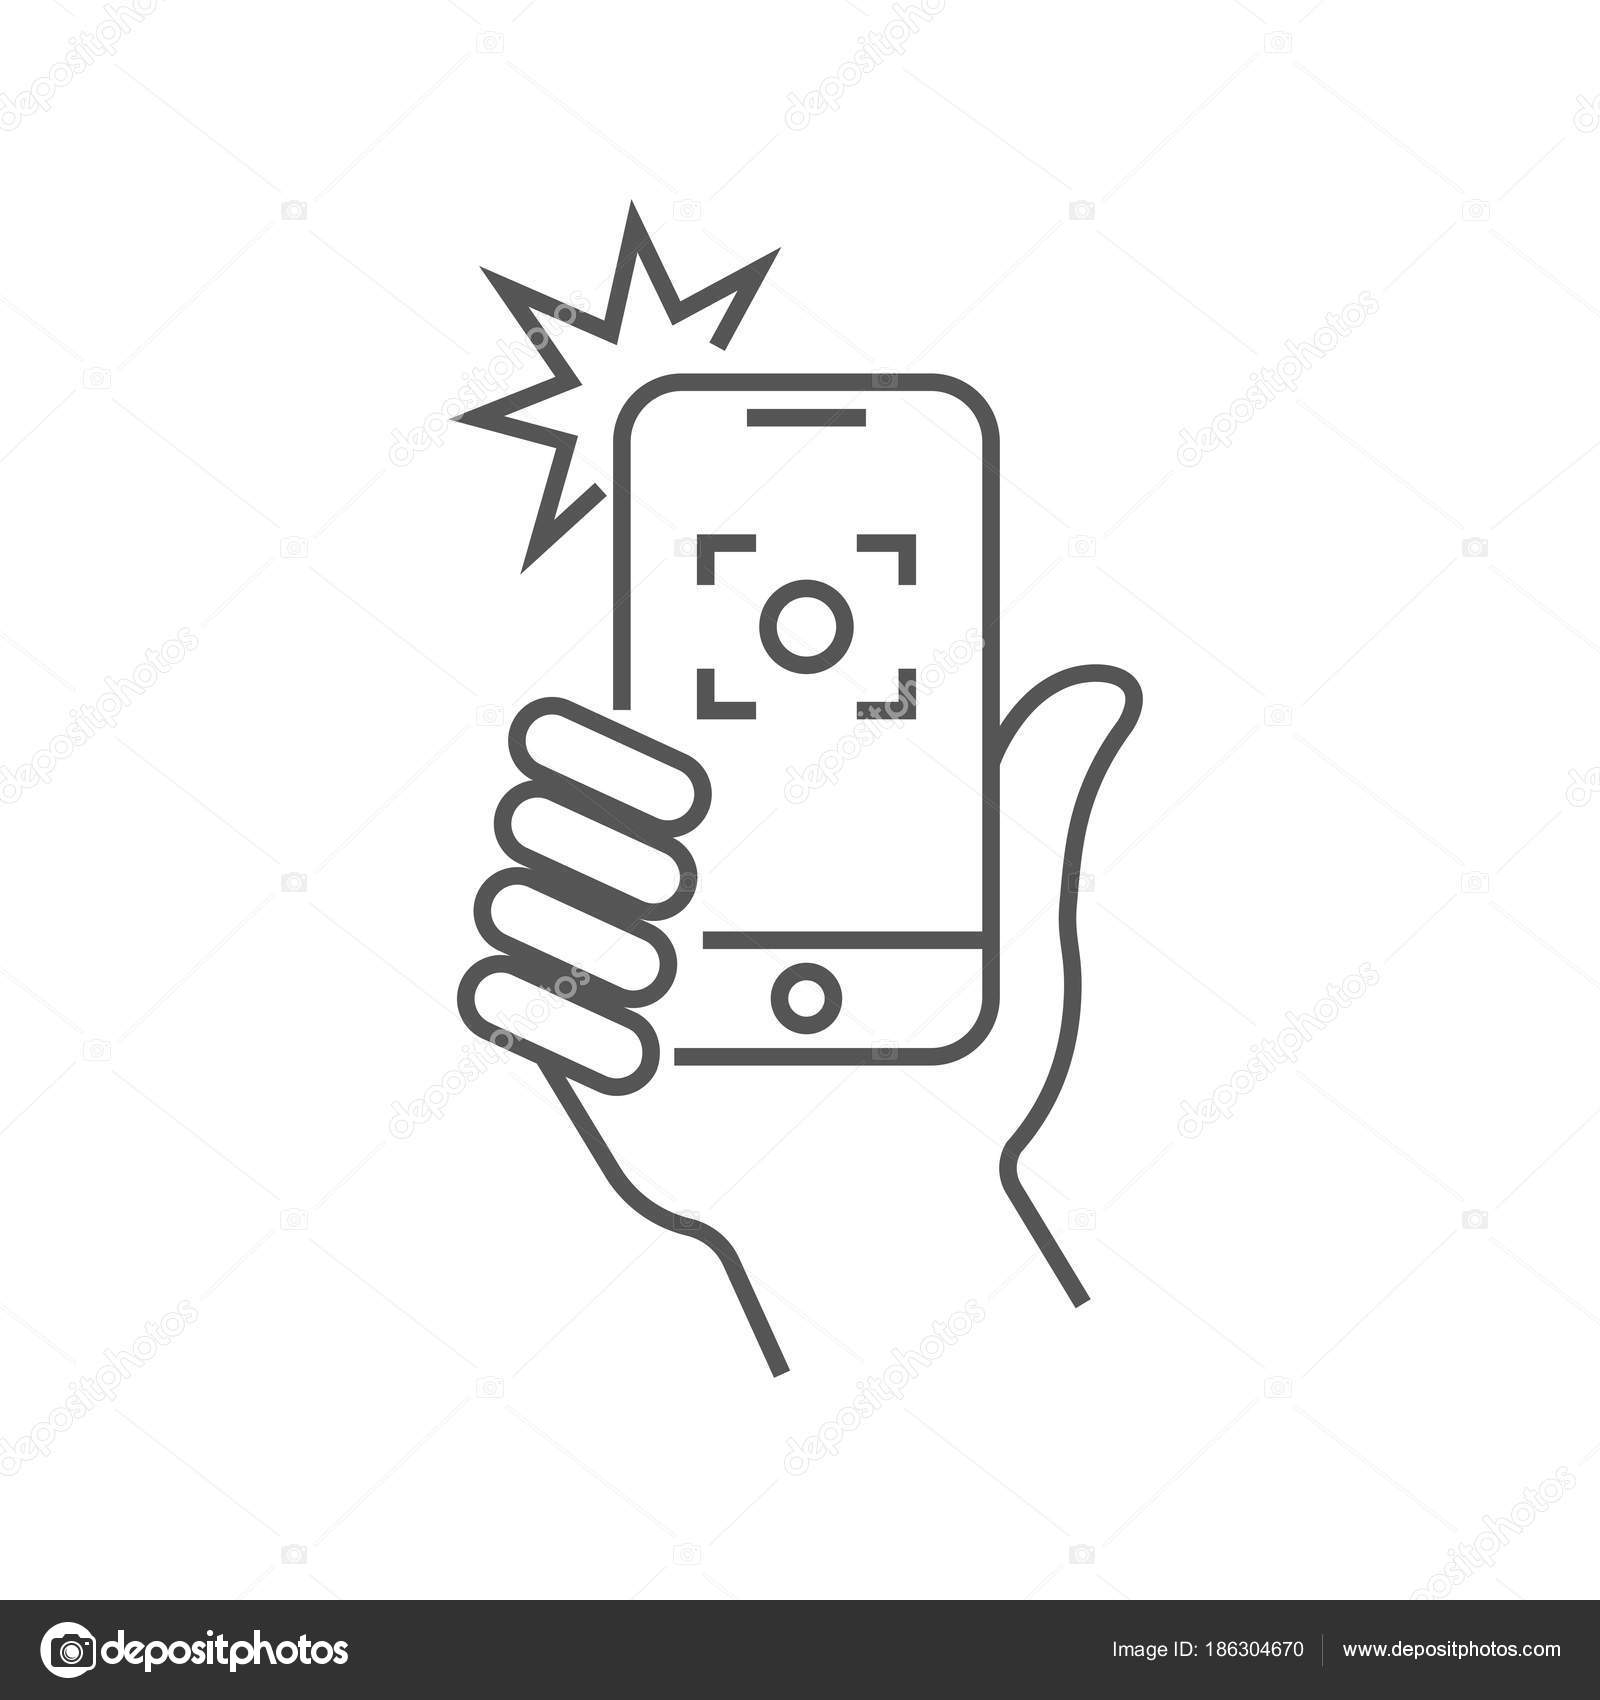 The Hand Hold The Smartphone And Photographed With A Flash Photo On Smartphone Editable Stroke Stock Vector C Defmorph1